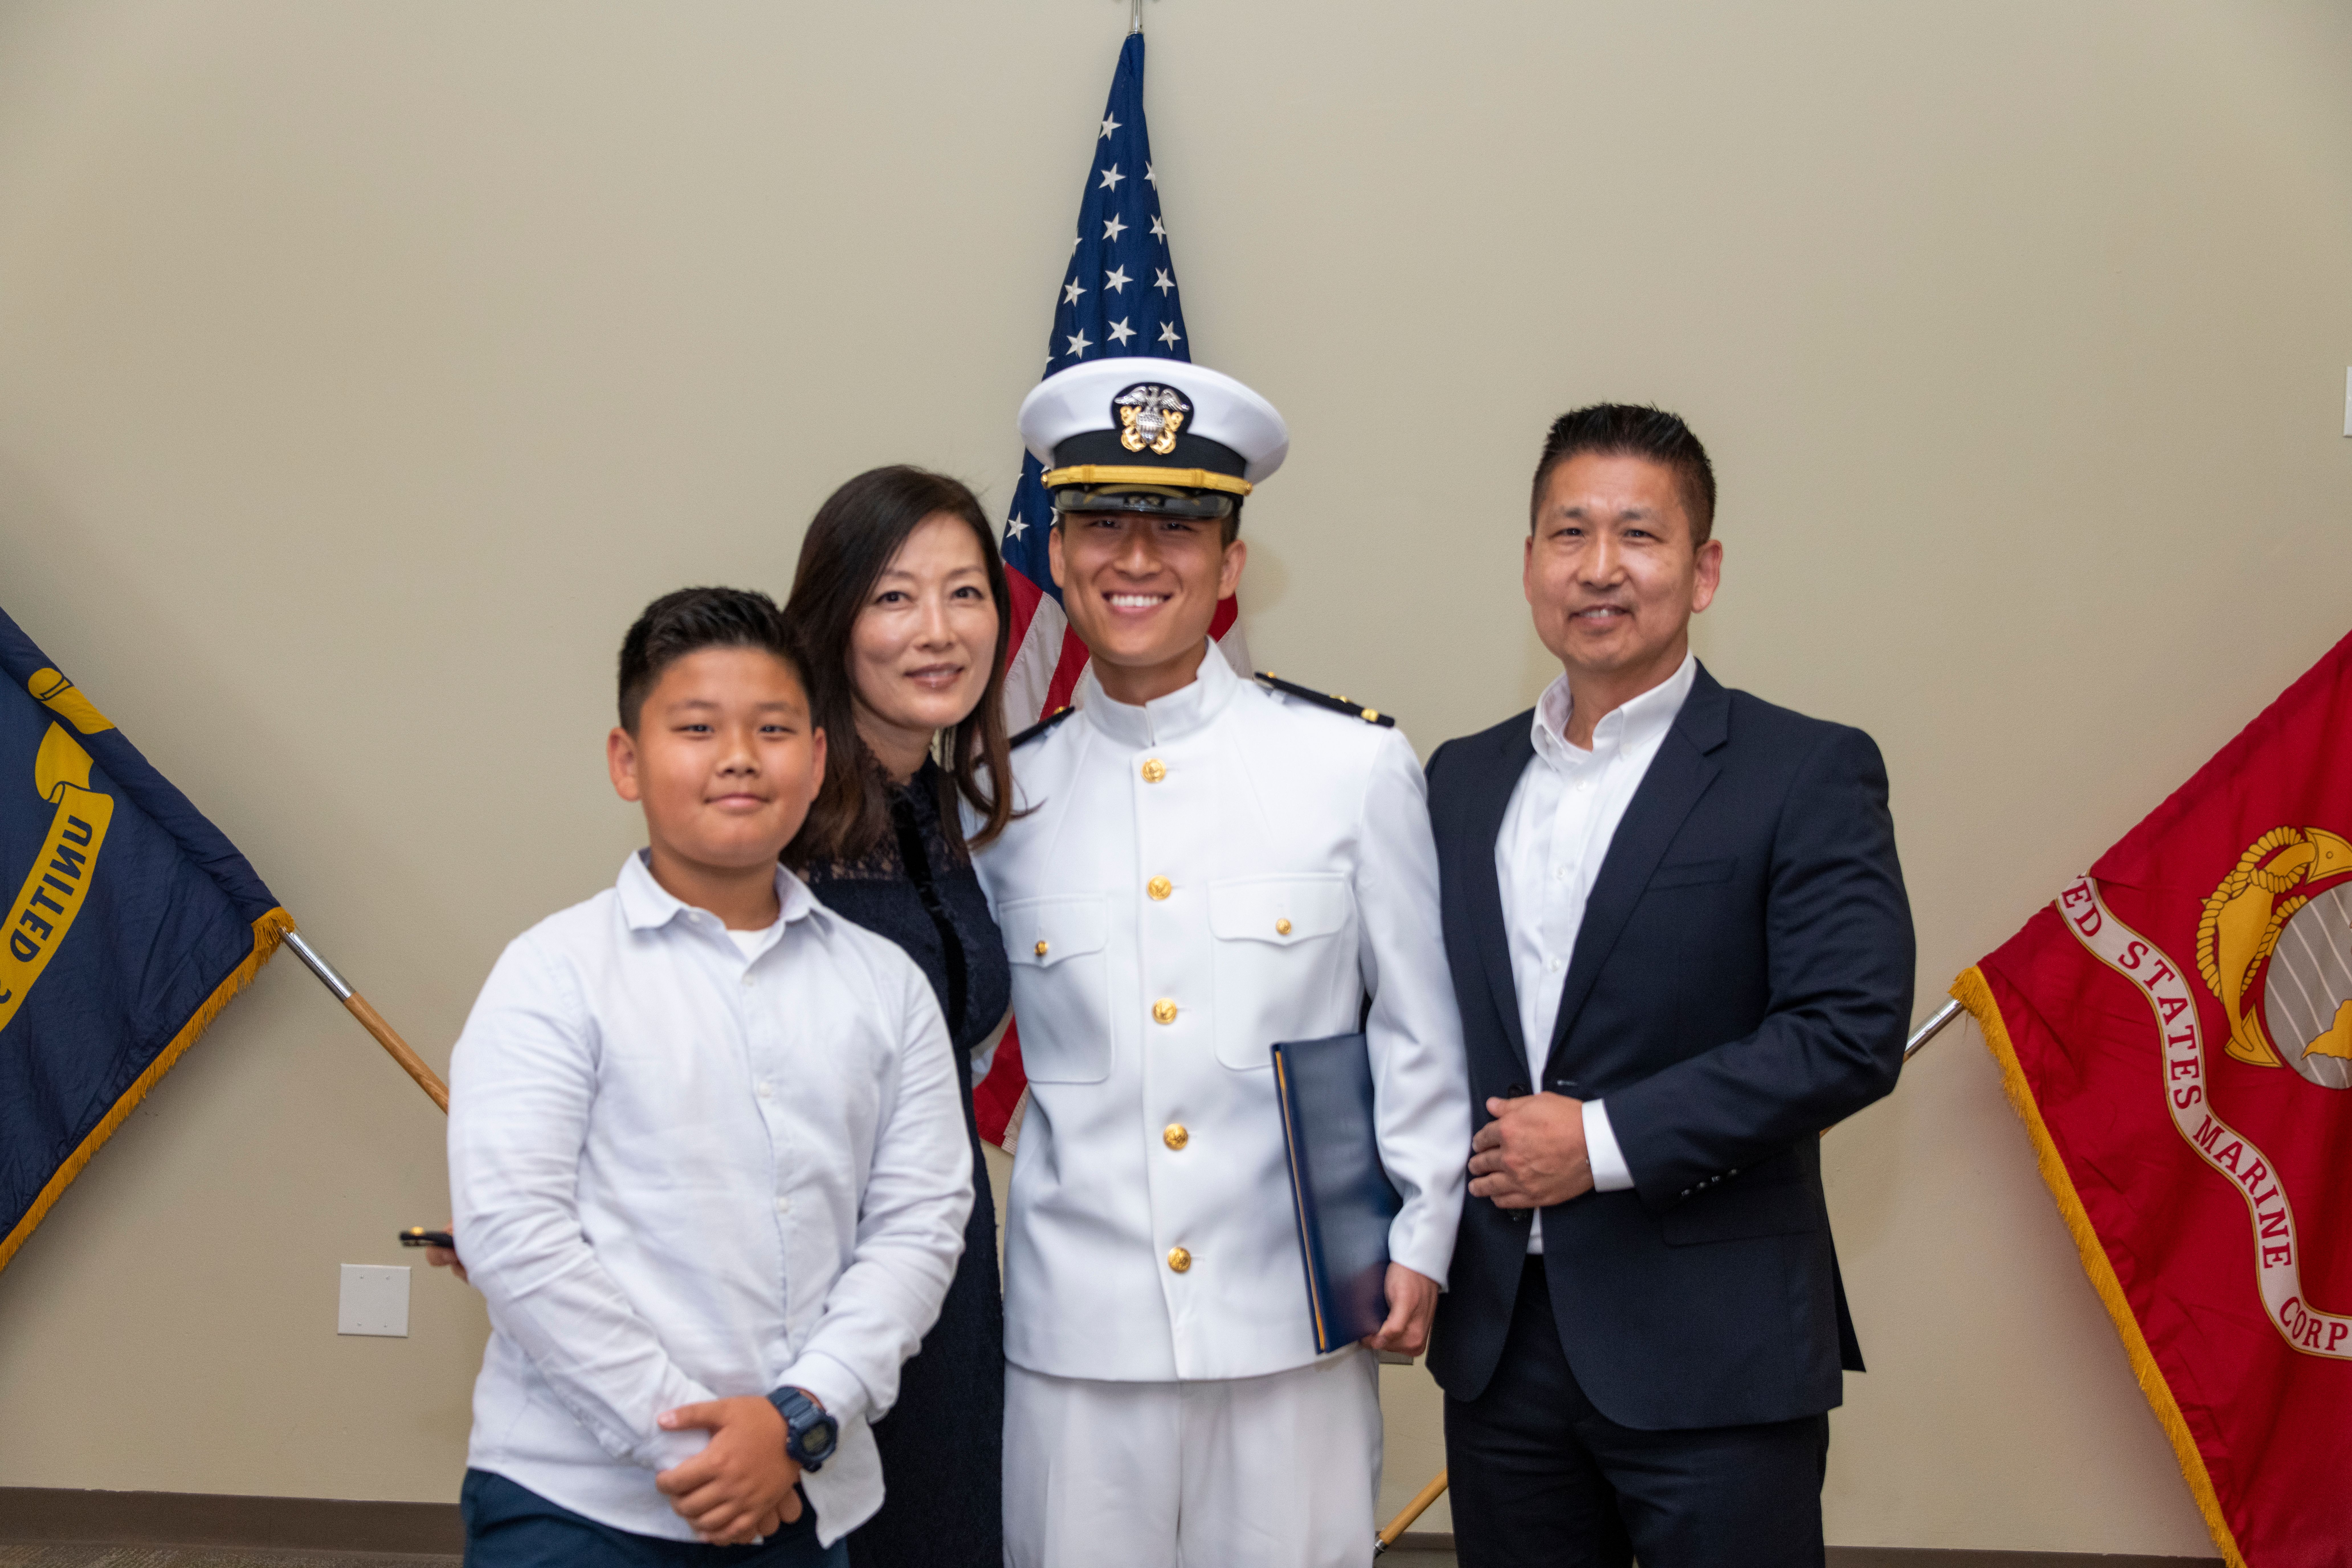 ENS Chung stands with his family with his commission warrant in hand